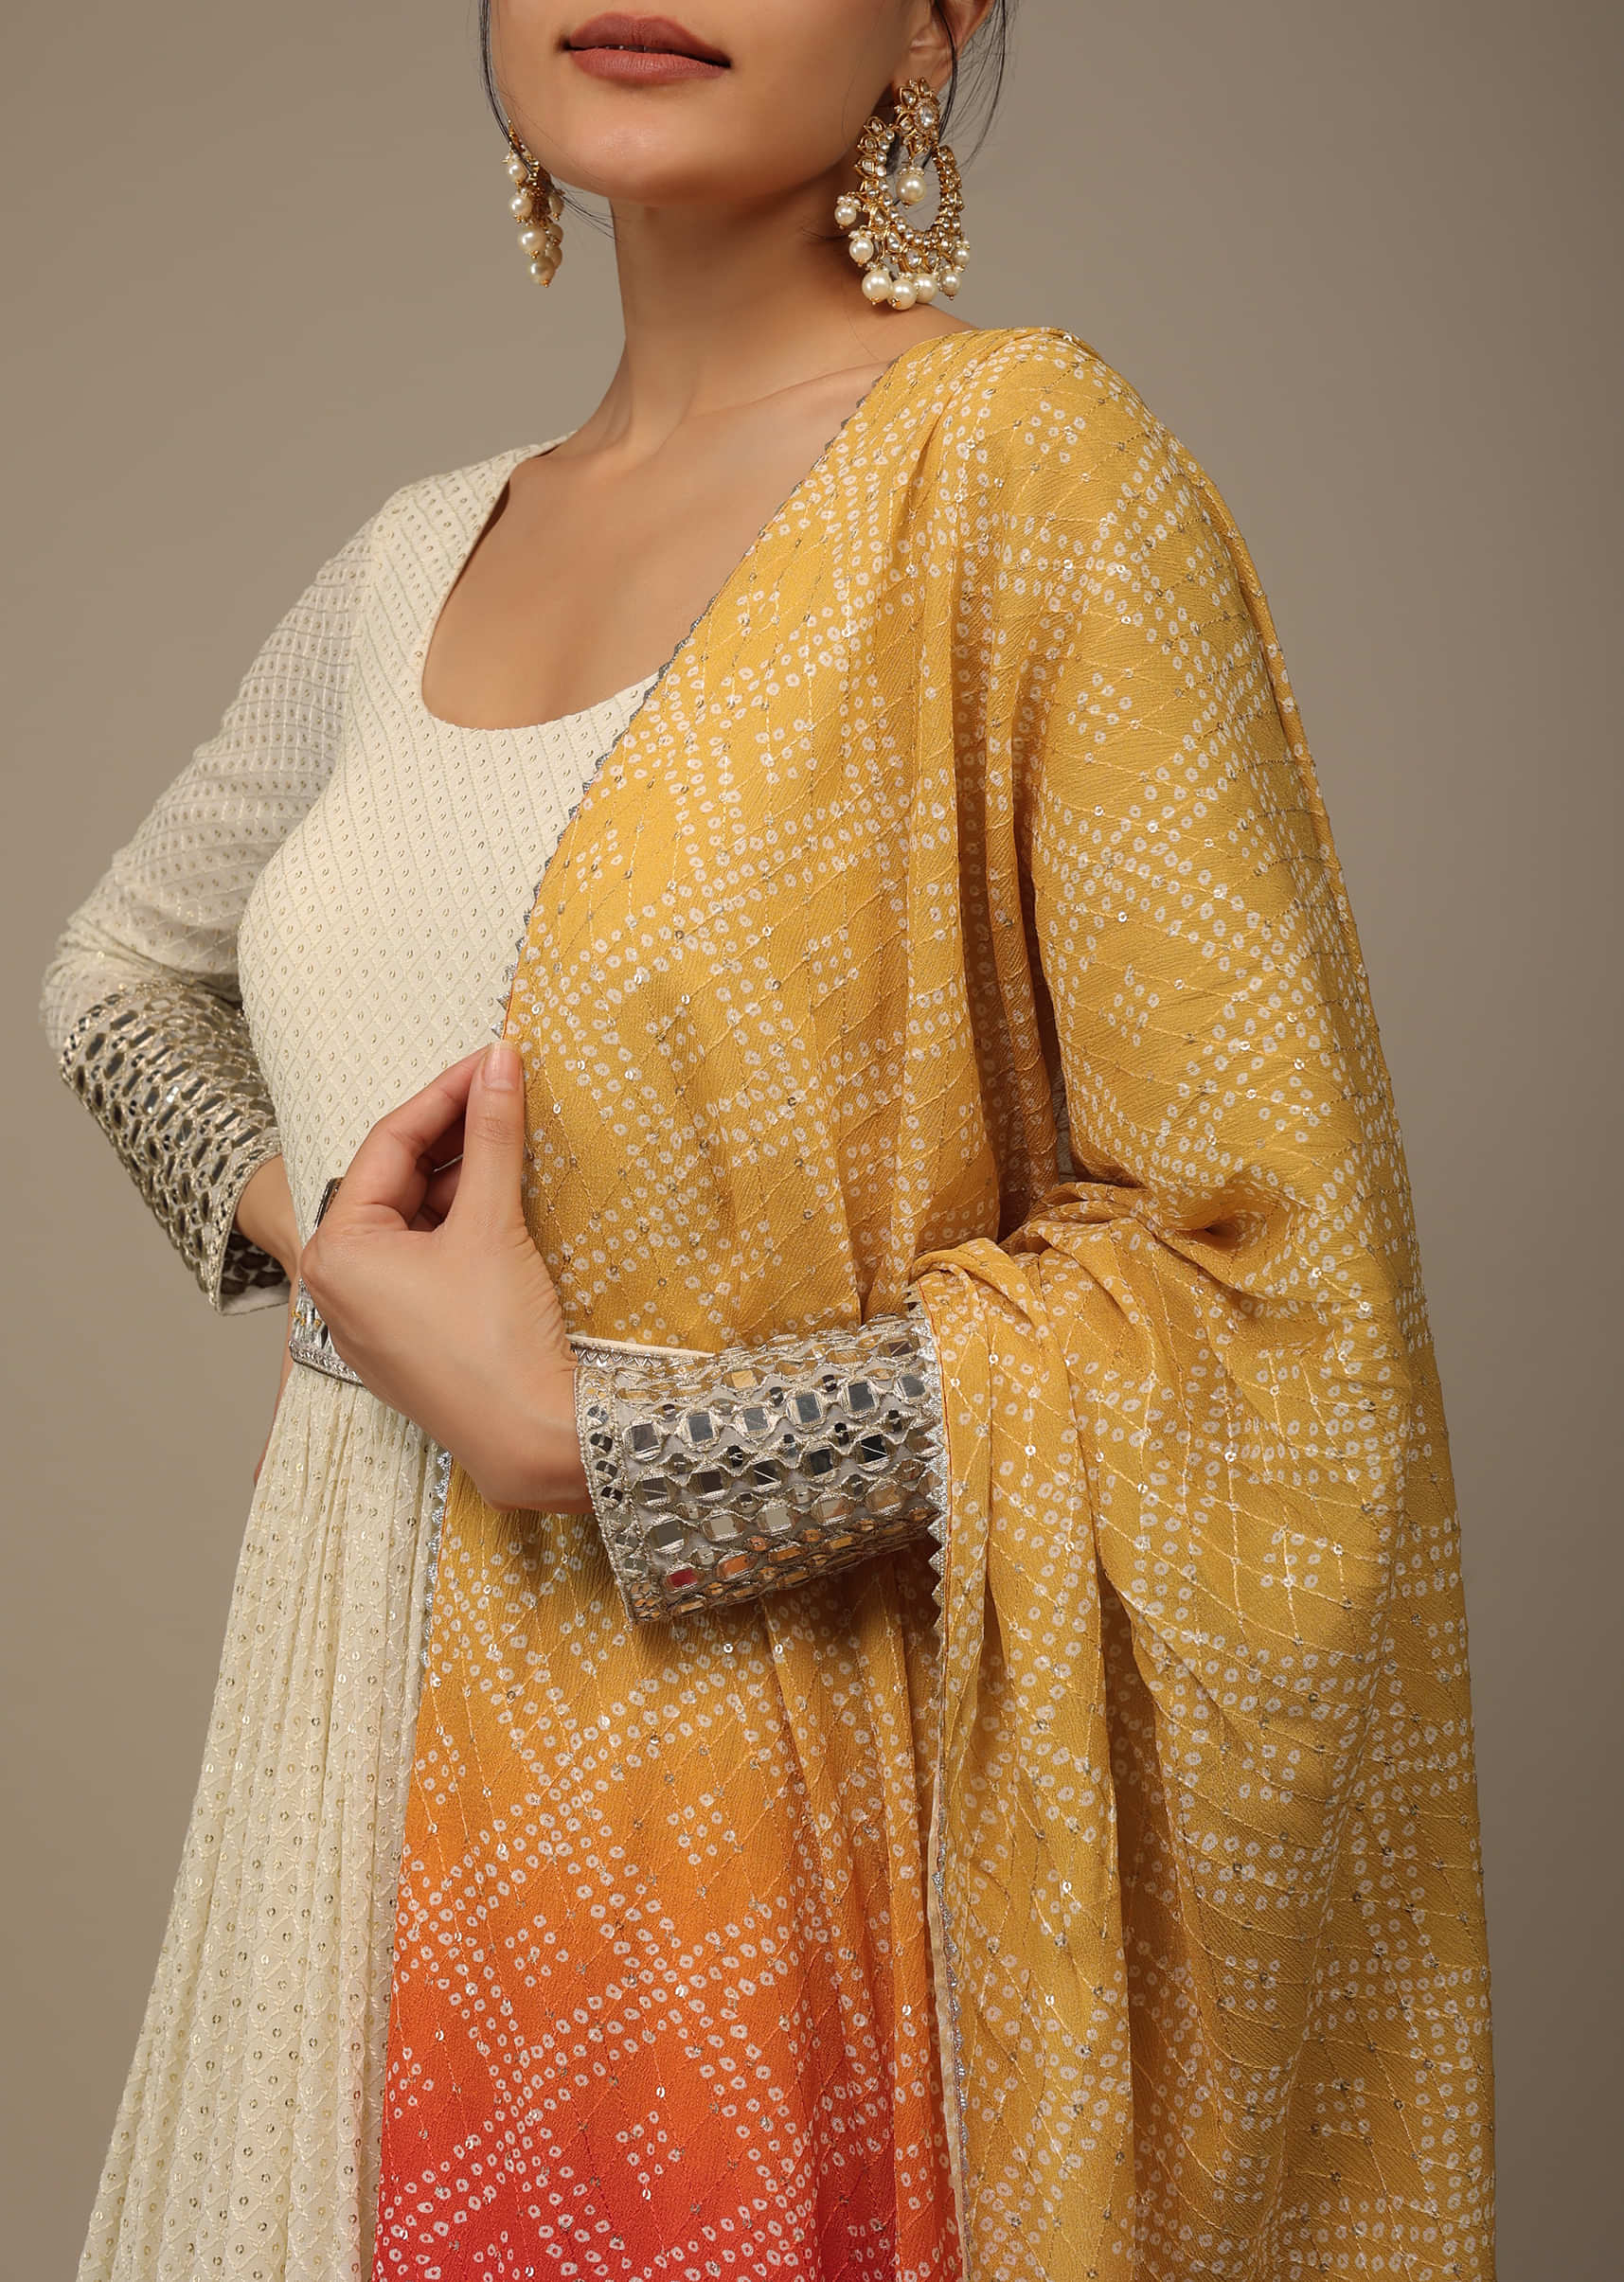 Daisy White Embroidered Anarkali Suit In Georgette With Yellow-Orange Ombre Bandhani Dupatta